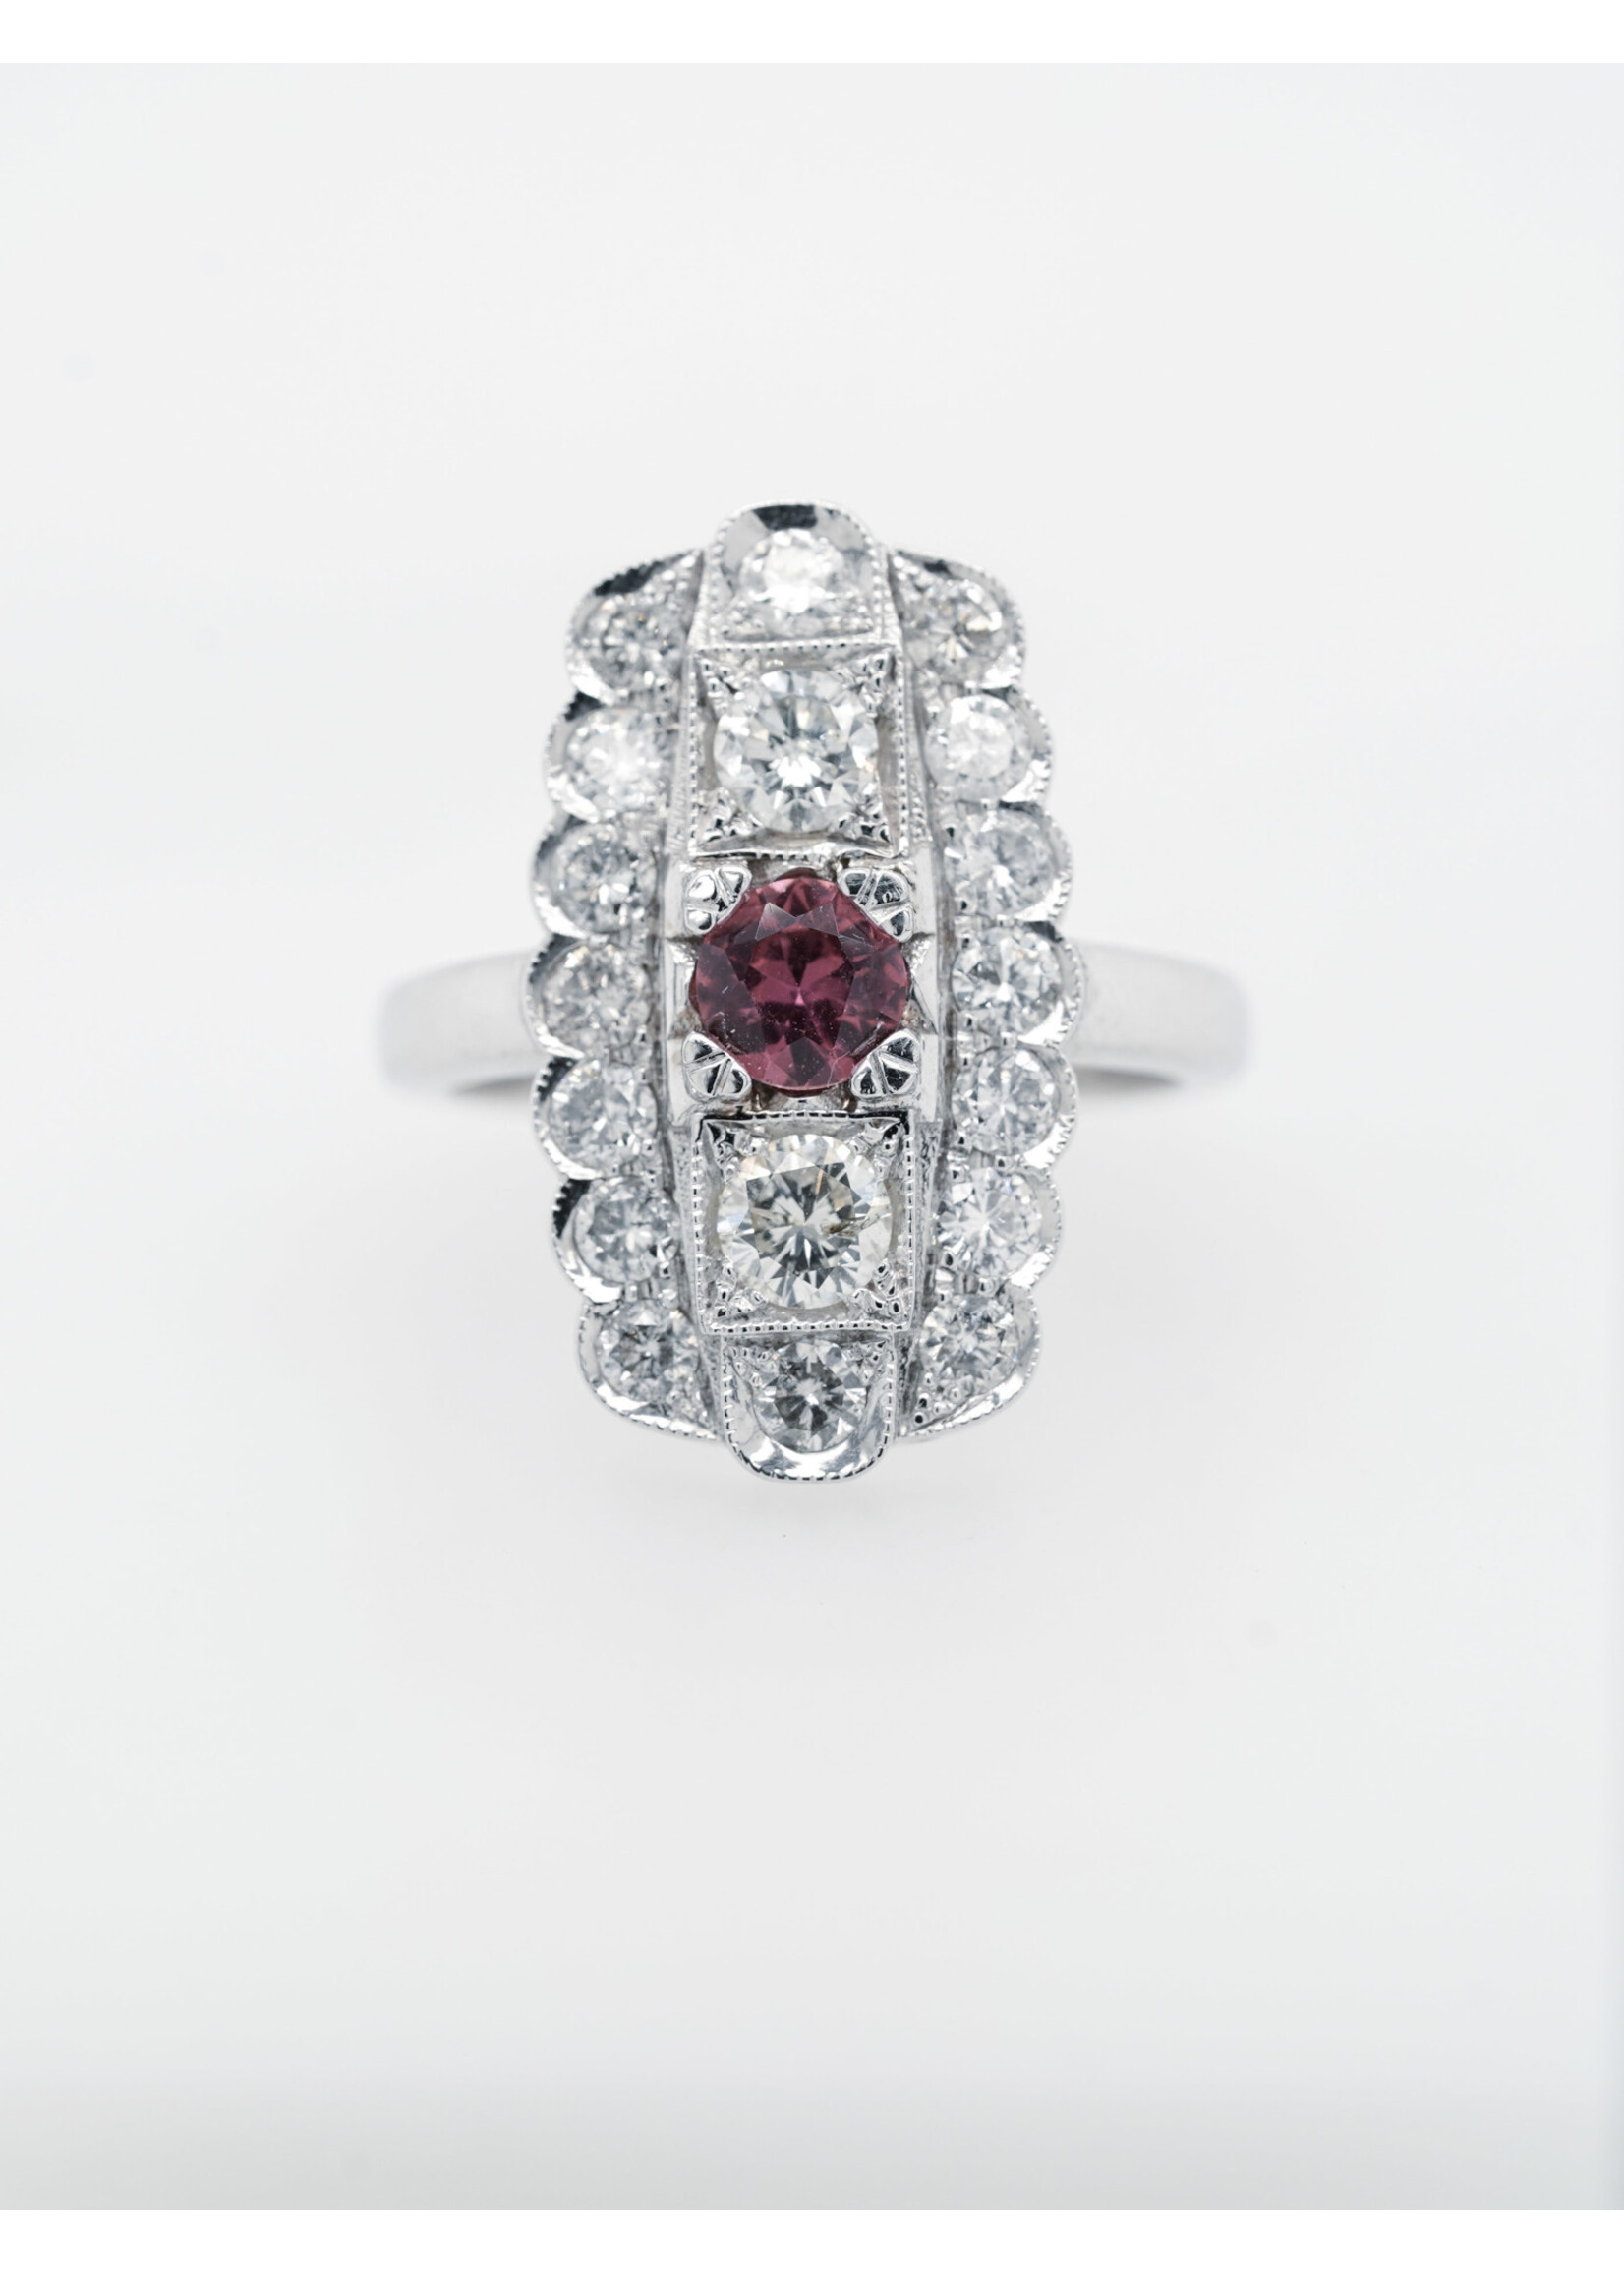 14KW 6.75g 2.80ctw (.60ctr) Pink Sapphire & Diamond Vintage Inspired Ring (size 8)